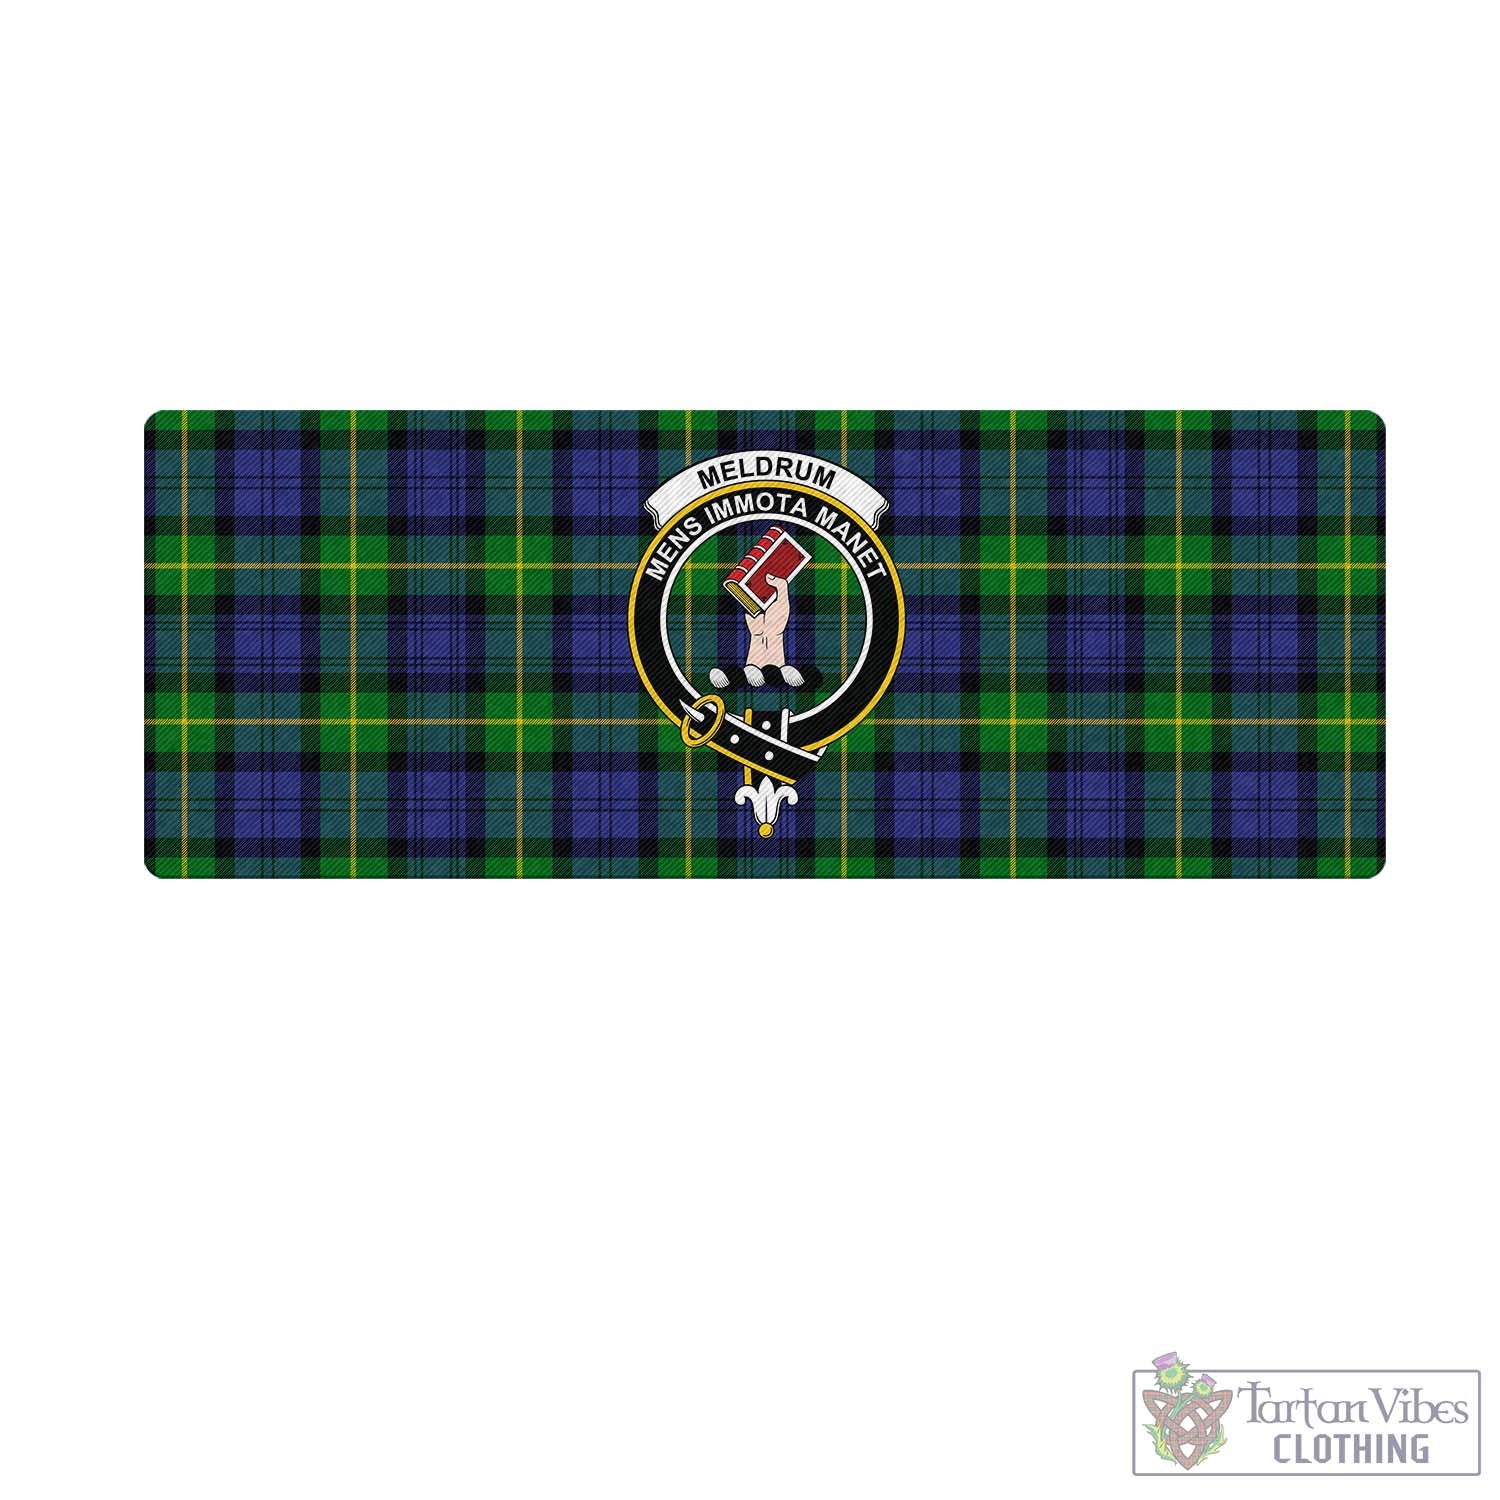 Tartan Vibes Clothing Meldrum Tartan Mouse Pad with Family Crest